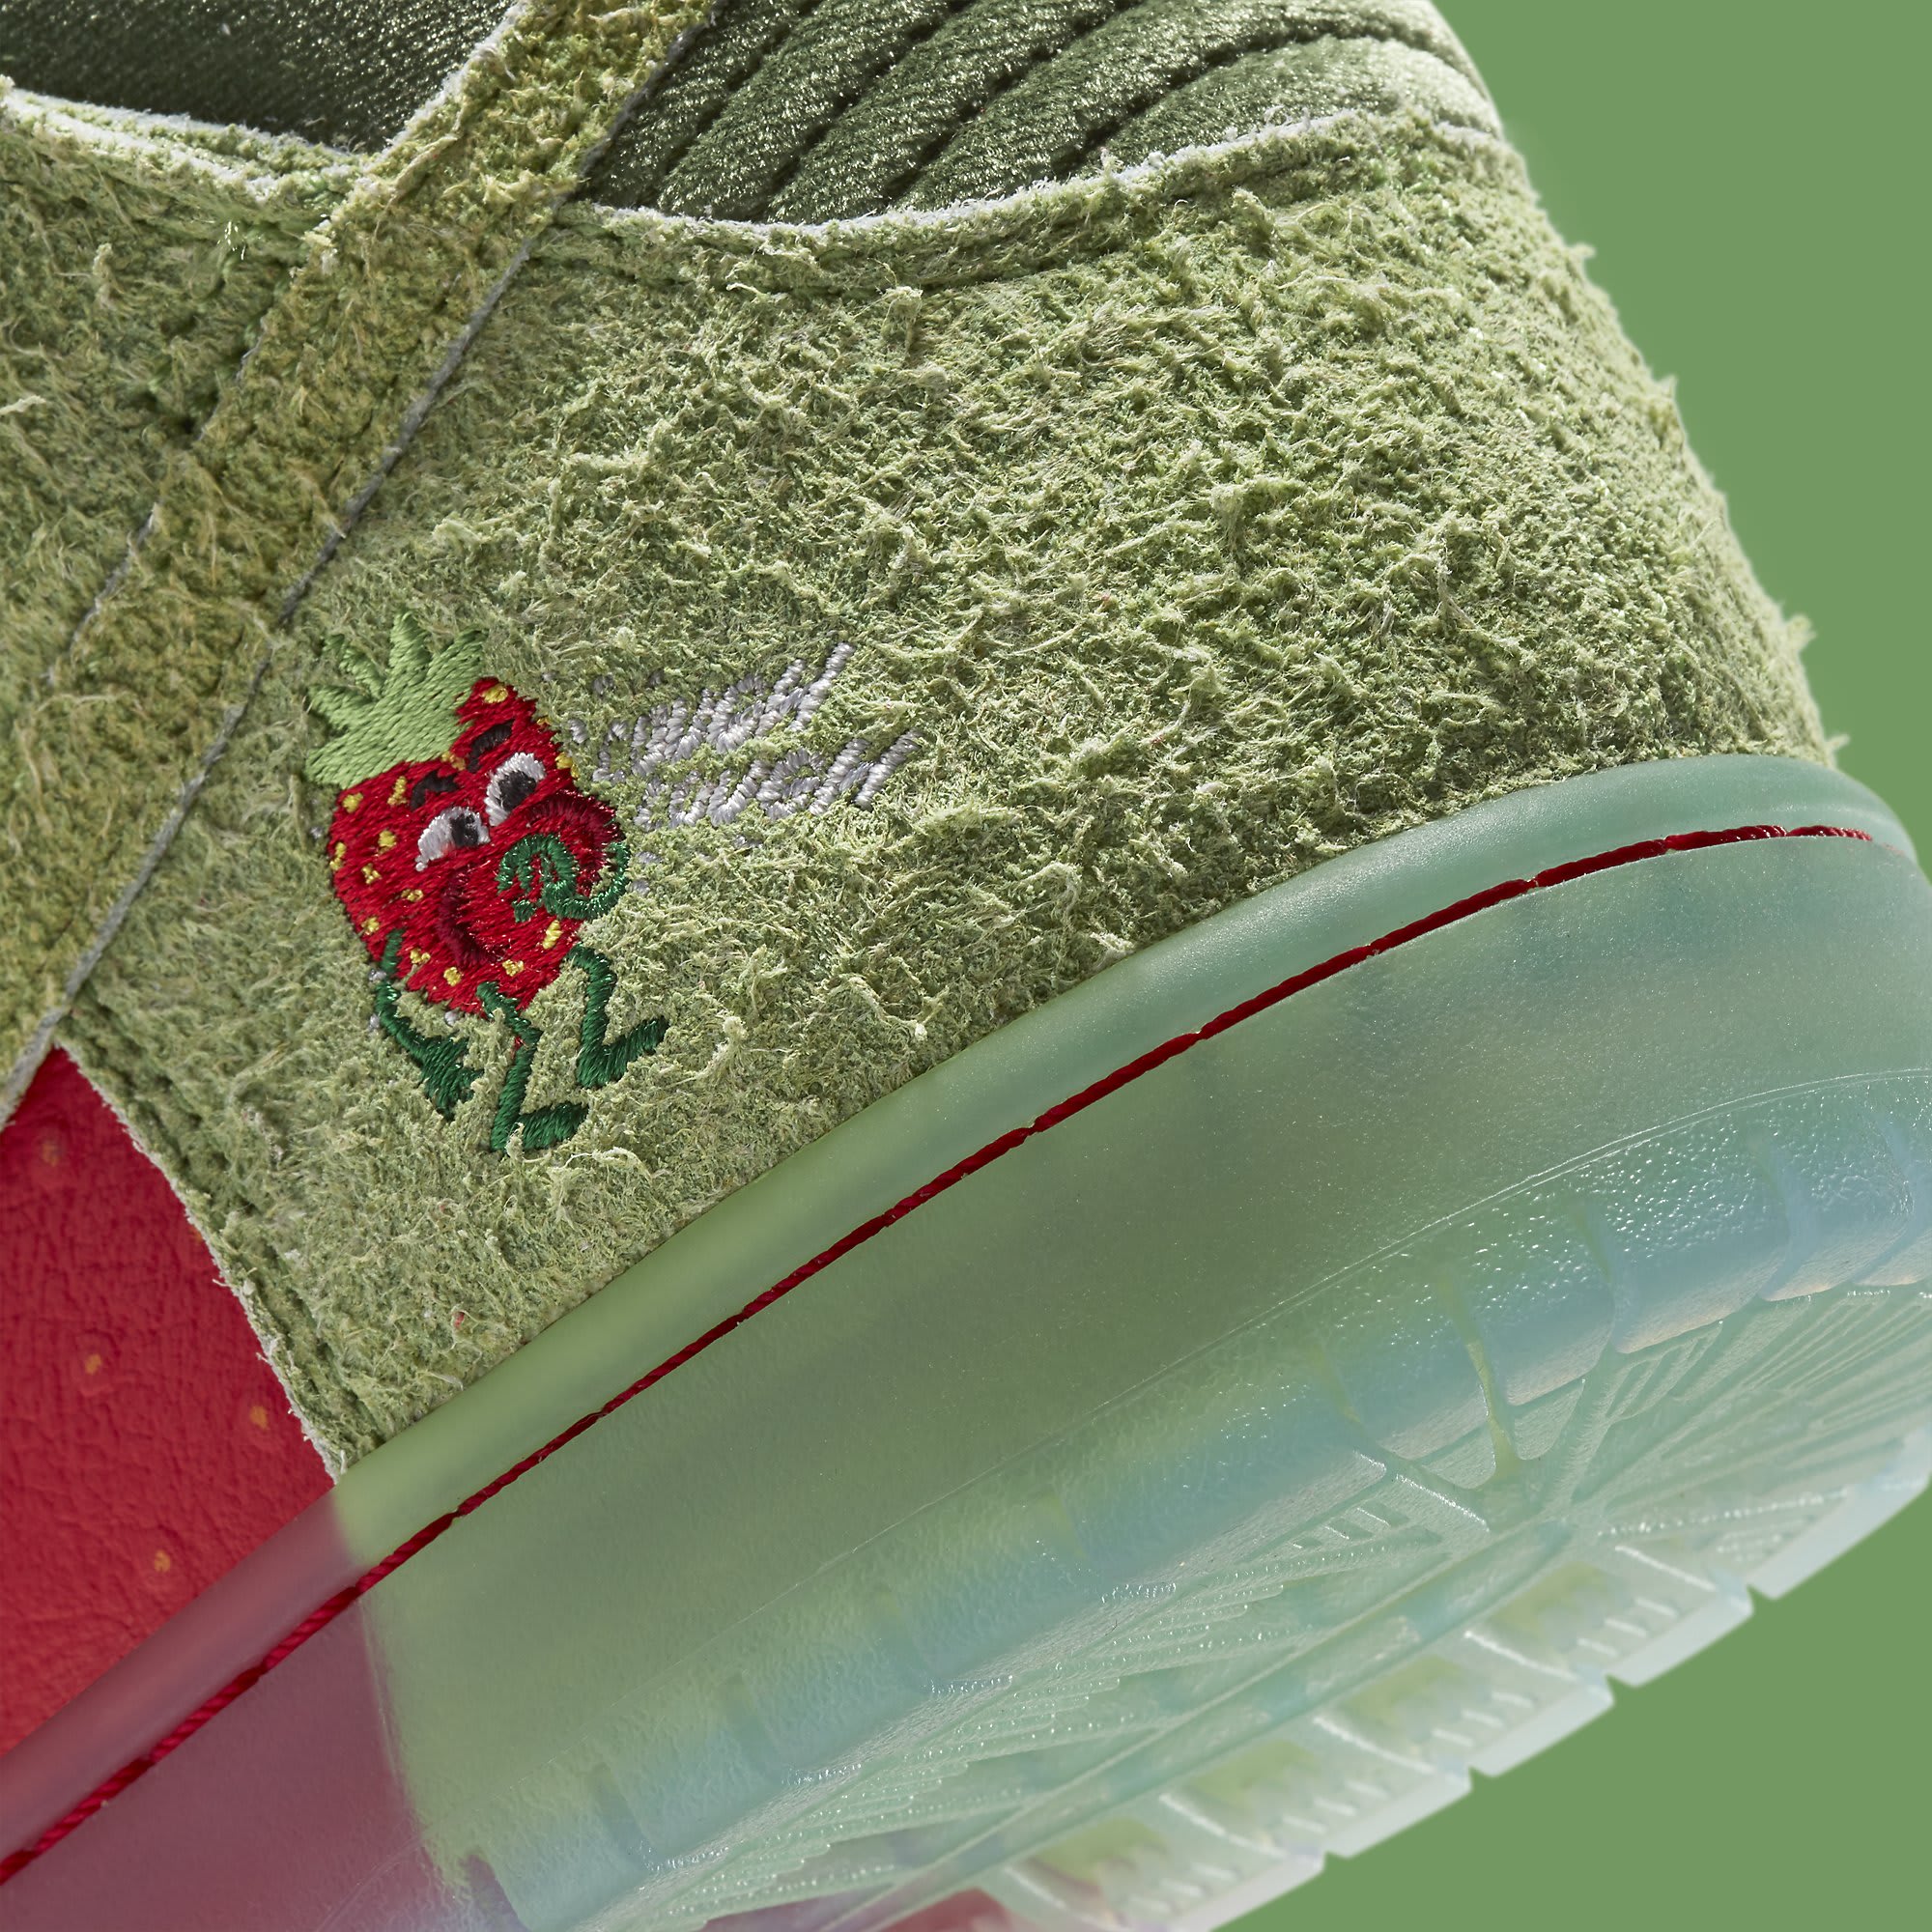 Strawberry Cough' Nike SB Dunk Highs Are Finally Releasing | Complex